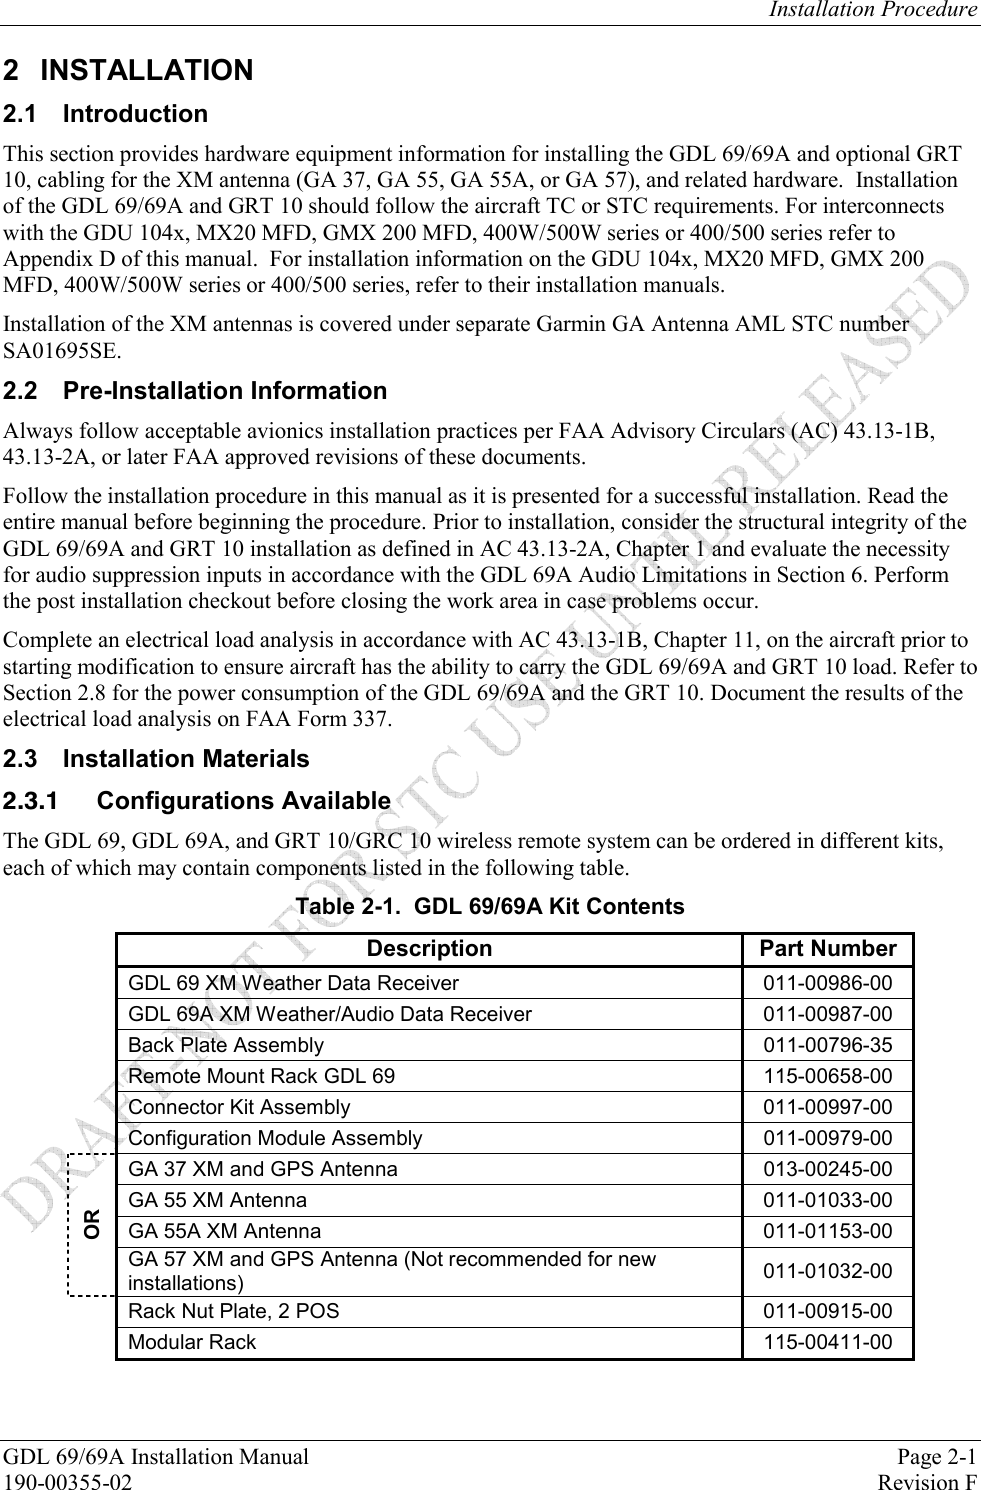 Installation Procedure GDL 69/69A Installation Manual  Page 2-1 190-00355-02  Revision F 2 INSTALLATION 2.1 Introduction This section provides hardware equipment information for installing the GDL 69/69A and optional GRT 10, cabling for the XM antenna (GA 37, GA 55, GA 55A, or GA 57), and related hardware.  Installation of the GDL 69/69A and GRT 10 should follow the aircraft TC or STC requirements. For interconnects with the GDU 104x, MX20 MFD, GMX 200 MFD, 400W/500W series or 400/500 series refer to Appendix D of this manual.  For installation information on the GDU 104x, MX20 MFD, GMX 200 MFD, 400W/500W series or 400/500 series, refer to their installation manuals.  Installation of the XM antennas is covered under separate Garmin GA Antenna AML STC number SA01695SE. 2.2 Pre-Installation Information Always follow acceptable avionics installation practices per FAA Advisory Circulars (AC) 43.13-1B, 43.13-2A, or later FAA approved revisions of these documents.  Follow the installation procedure in this manual as it is presented for a successful installation. Read the entire manual before beginning the procedure. Prior to installation, consider the structural integrity of the GDL 69/69A and GRT 10 installation as defined in AC 43.13-2A, Chapter 1 and evaluate the necessity for audio suppression inputs in accordance with the GDL 69A Audio Limitations in Section 6. Perform the post installation checkout before closing the work area in case problems occur.  Complete an electrical load analysis in accordance with AC 43.13-1B, Chapter 11, on the aircraft prior to starting modification to ensure aircraft has the ability to carry the GDL 69/69A and GRT 10 load. Refer to Section 2.8 for the power consumption of the GDL 69/69A and the GRT 10. Document the results of the electrical load analysis on FAA Form 337.  2.3 Installation Materials  Configurations Available The GDL 69, GDL 69A, and GRT 10/GRC 10 wireless remote system can be ordered in different kits, each of which may contain components listed in the following table. Table 2-1.  GDL 69/69A Kit Contents  Description Part Number  GDL 69 XM Weather Data Receiver  011-00986-00  GDL 69A XM Weather/Audio Data Receiver  011-00987-00  Back Plate Assembly  011-00796-35  Remote Mount Rack GDL 69  115-00658-00  Connector Kit Assembly  011-00997-00  Configuration Module Assembly   011-00979-00 GA 37 XM and GPS Antenna  013-00245-00 GA 55 XM Antenna   011-01033-00 GA 55A XM Antenna  011-01153-00 OR GA 57 XM and GPS Antenna (Not recommended for new installations)  011-01032-00  Rack Nut Plate, 2 POS  011-00915-00  Modular Rack  115-00411-00  